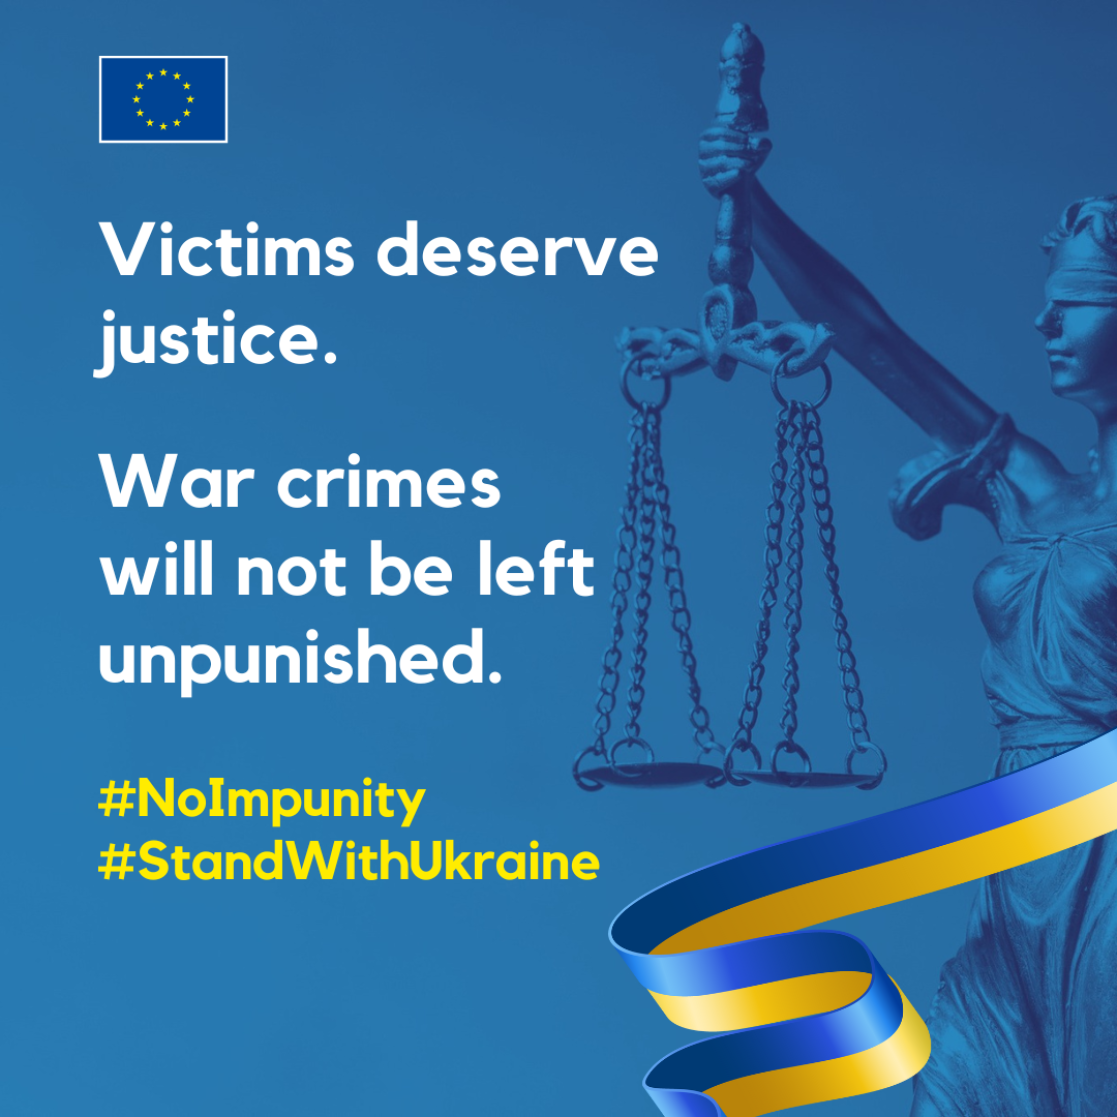 Victims deserve justice, war crimes will no be unpunished. Stand with Ukraine banner. 